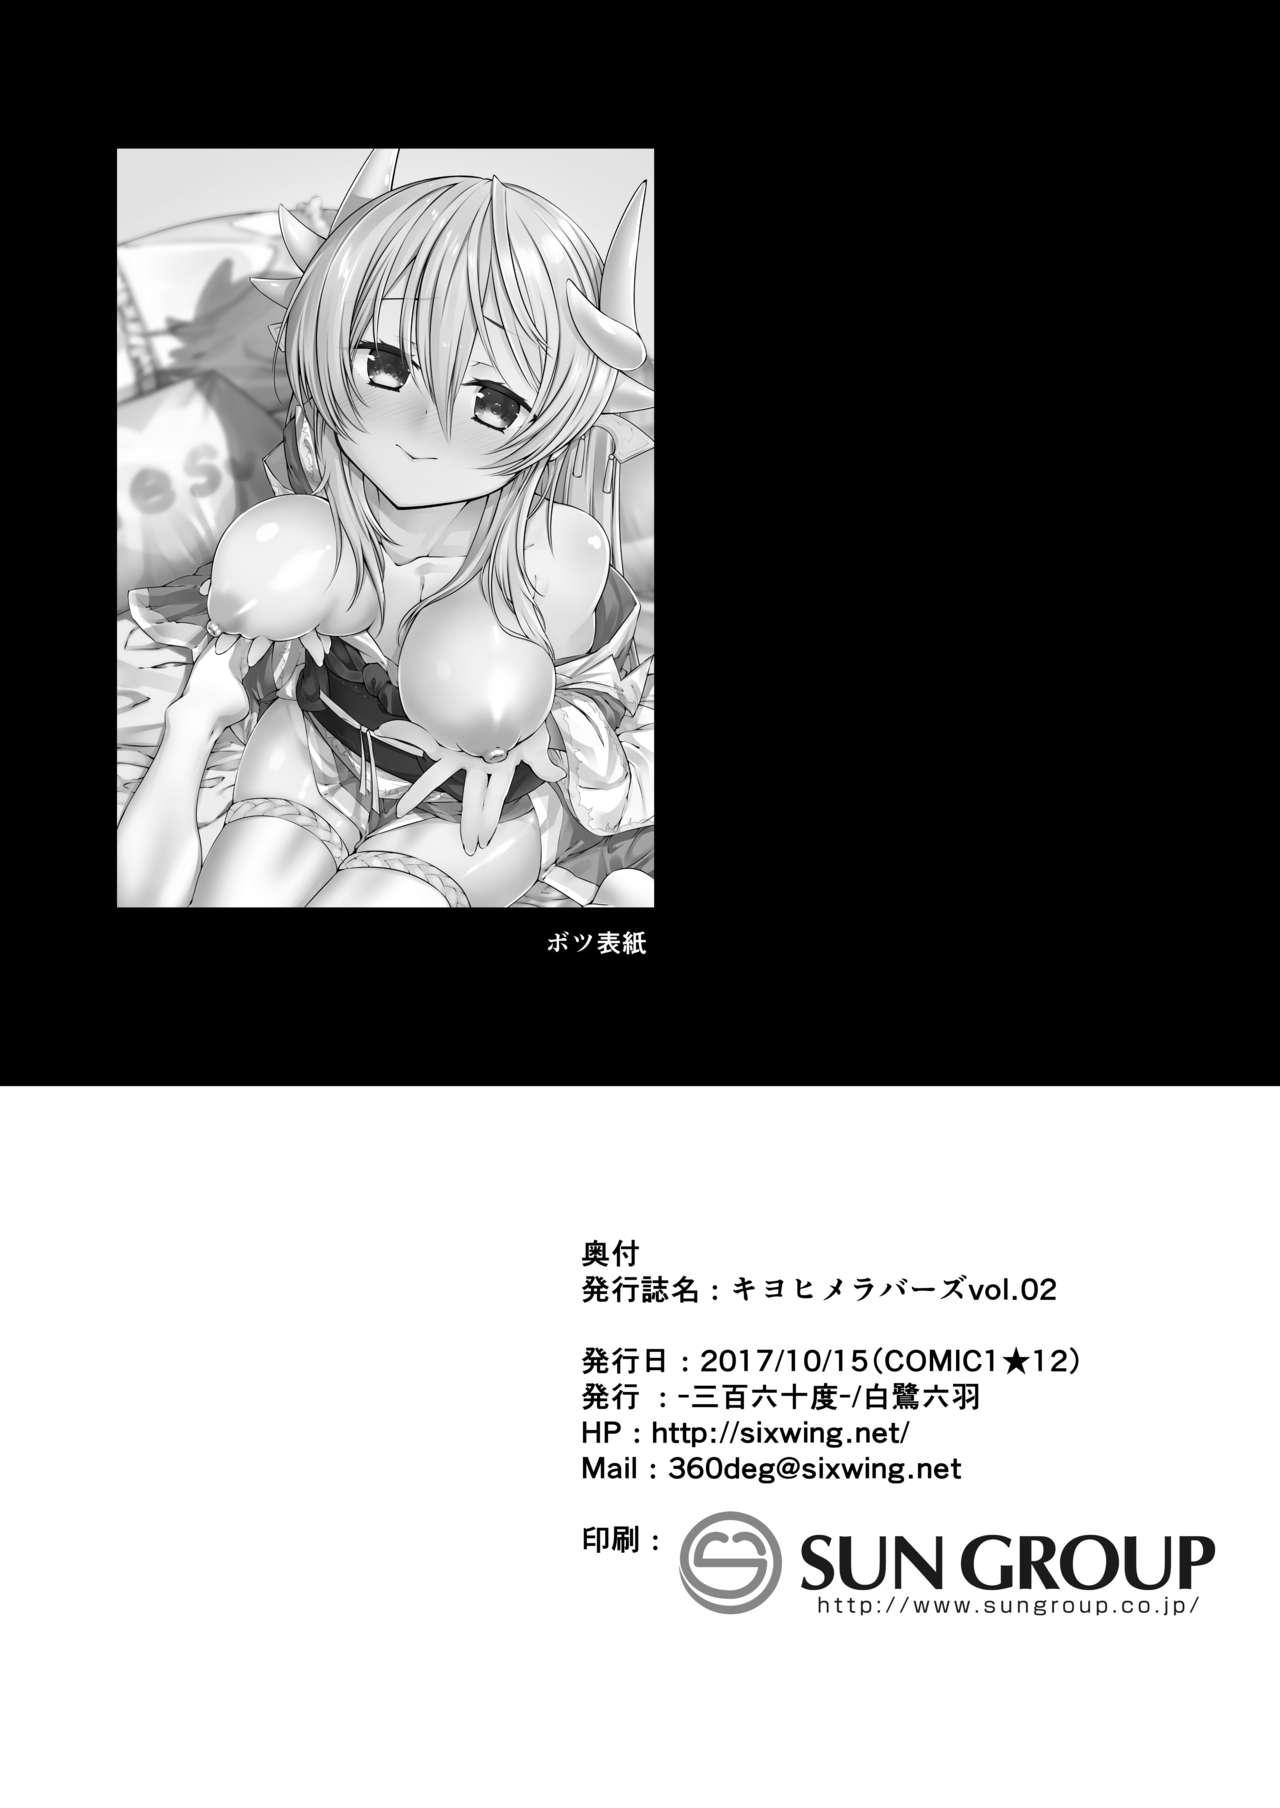 Lez Kiyohime Lovers vol. 02 - Fate grand order Chica - Page 21